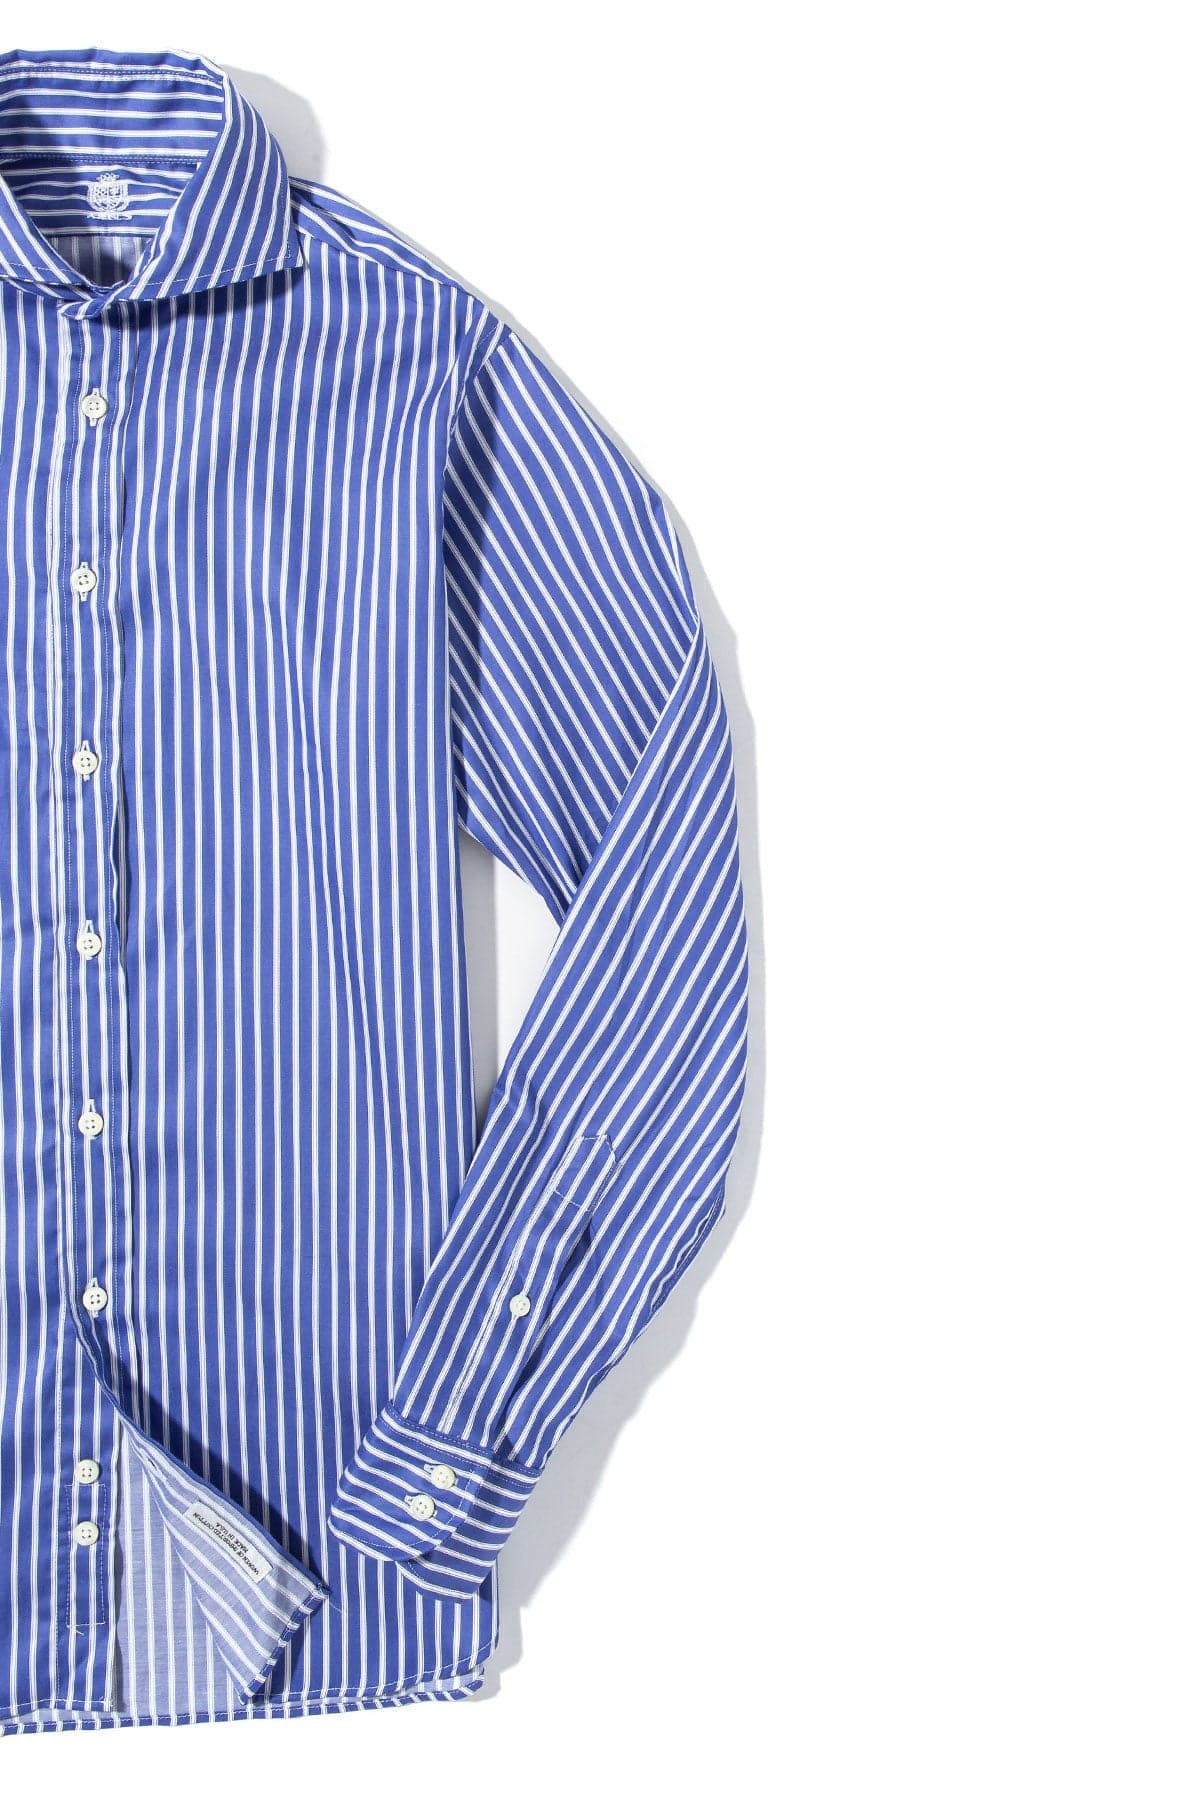 Carrera Cotton Speed shirt In Blue and White - AXEL'S